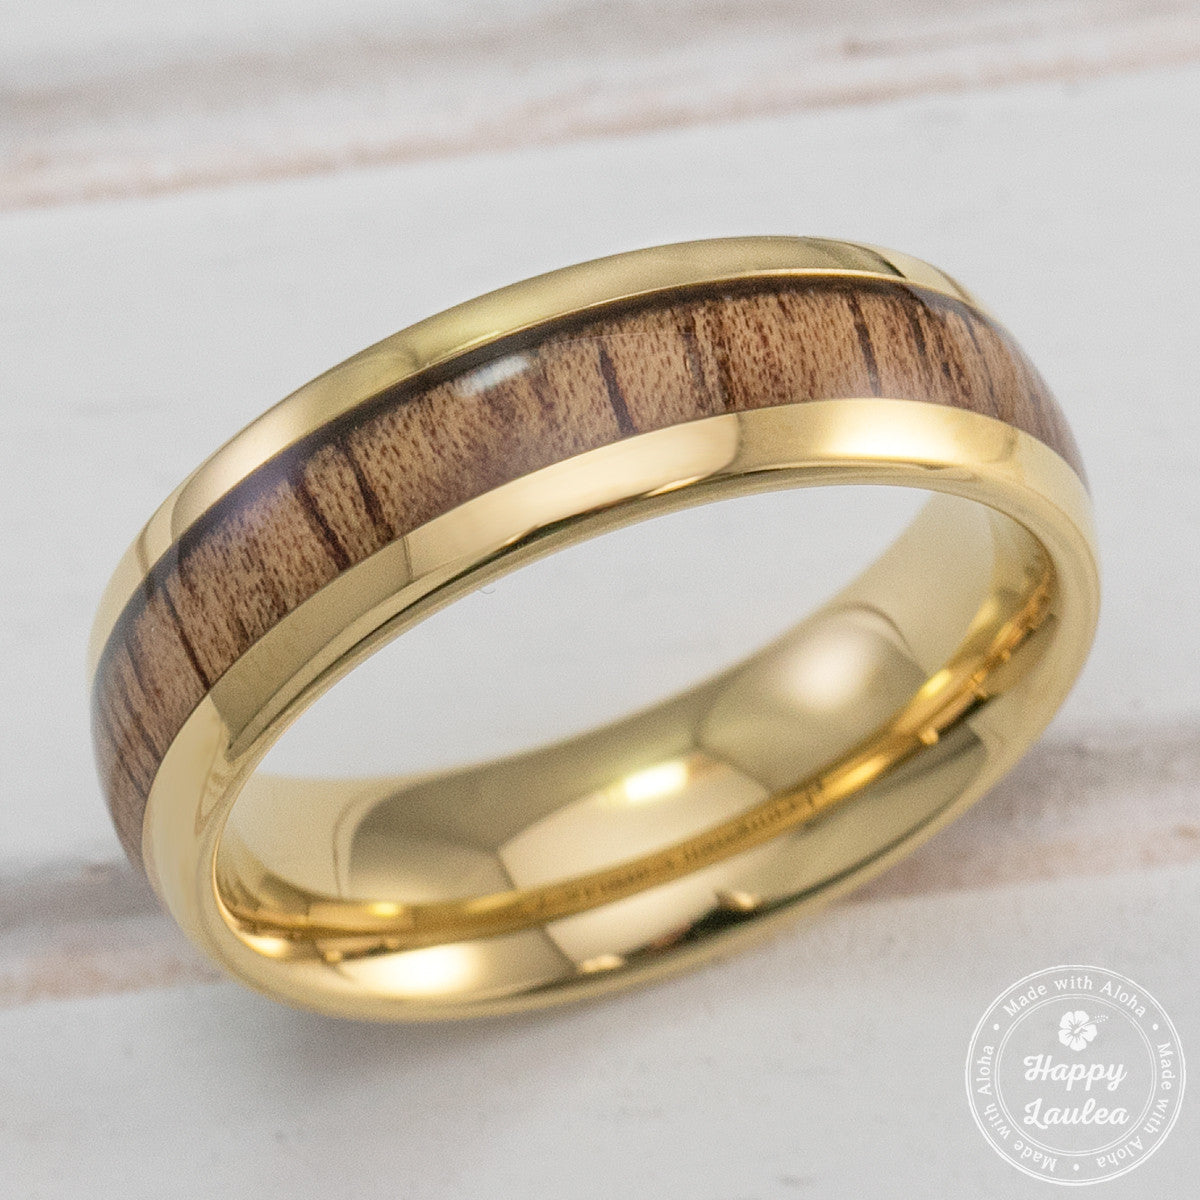 Pair of Tungsten Carbide Gold Plated Rings with Koa Wood Inlay - 6&8mm, Dome Shape, Comfort Fitment